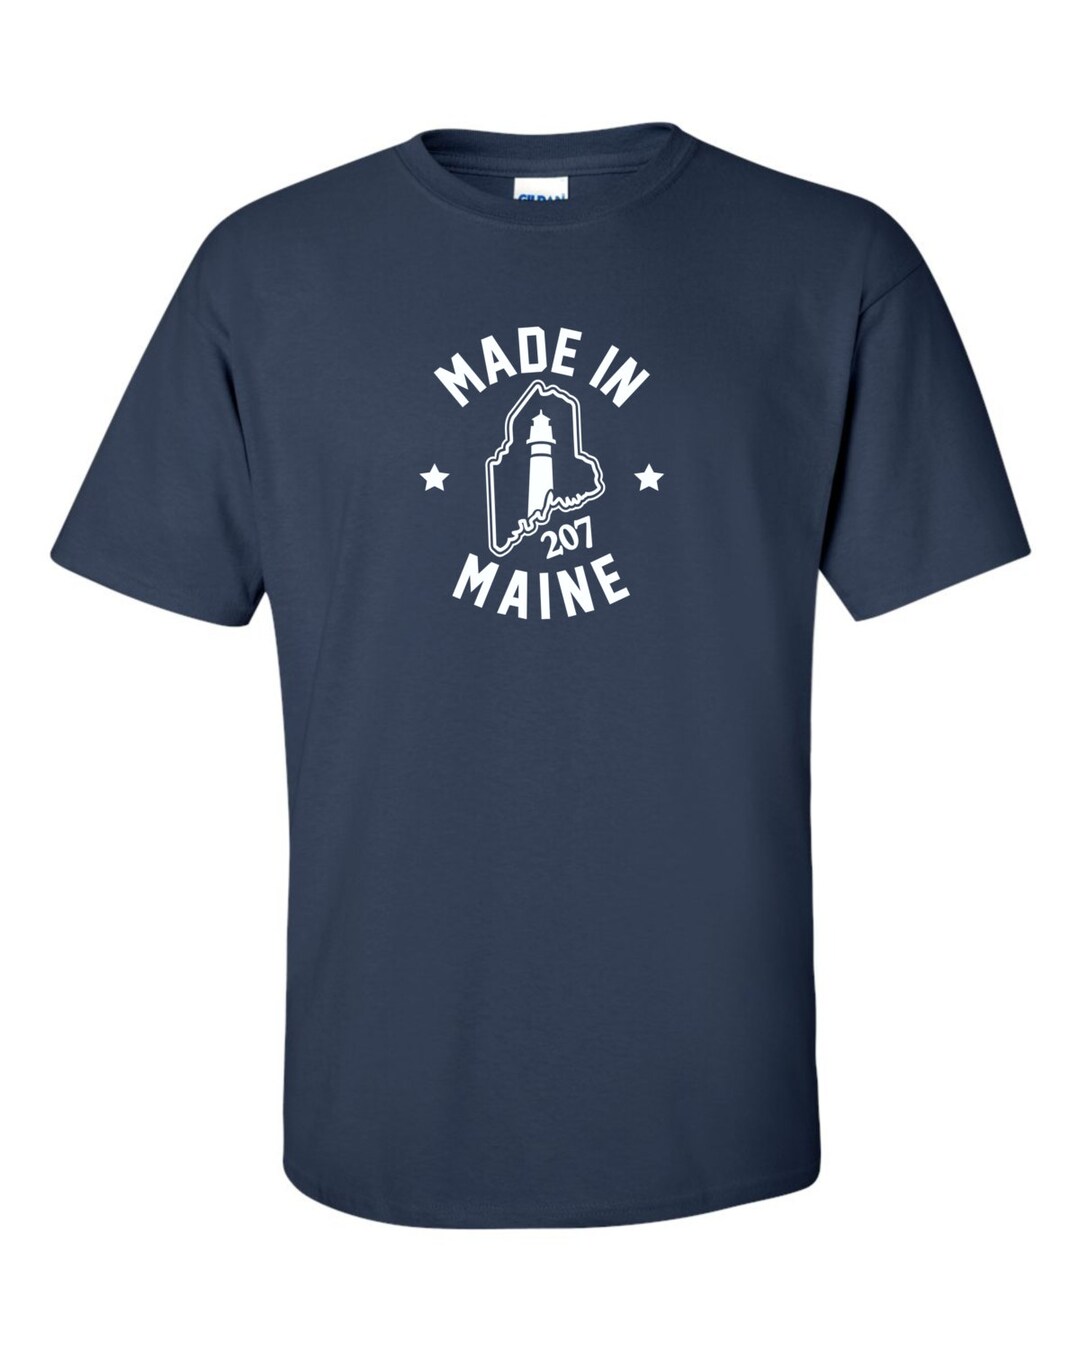 New made in Maine T-shirt Choose From Over 30 - Etsy